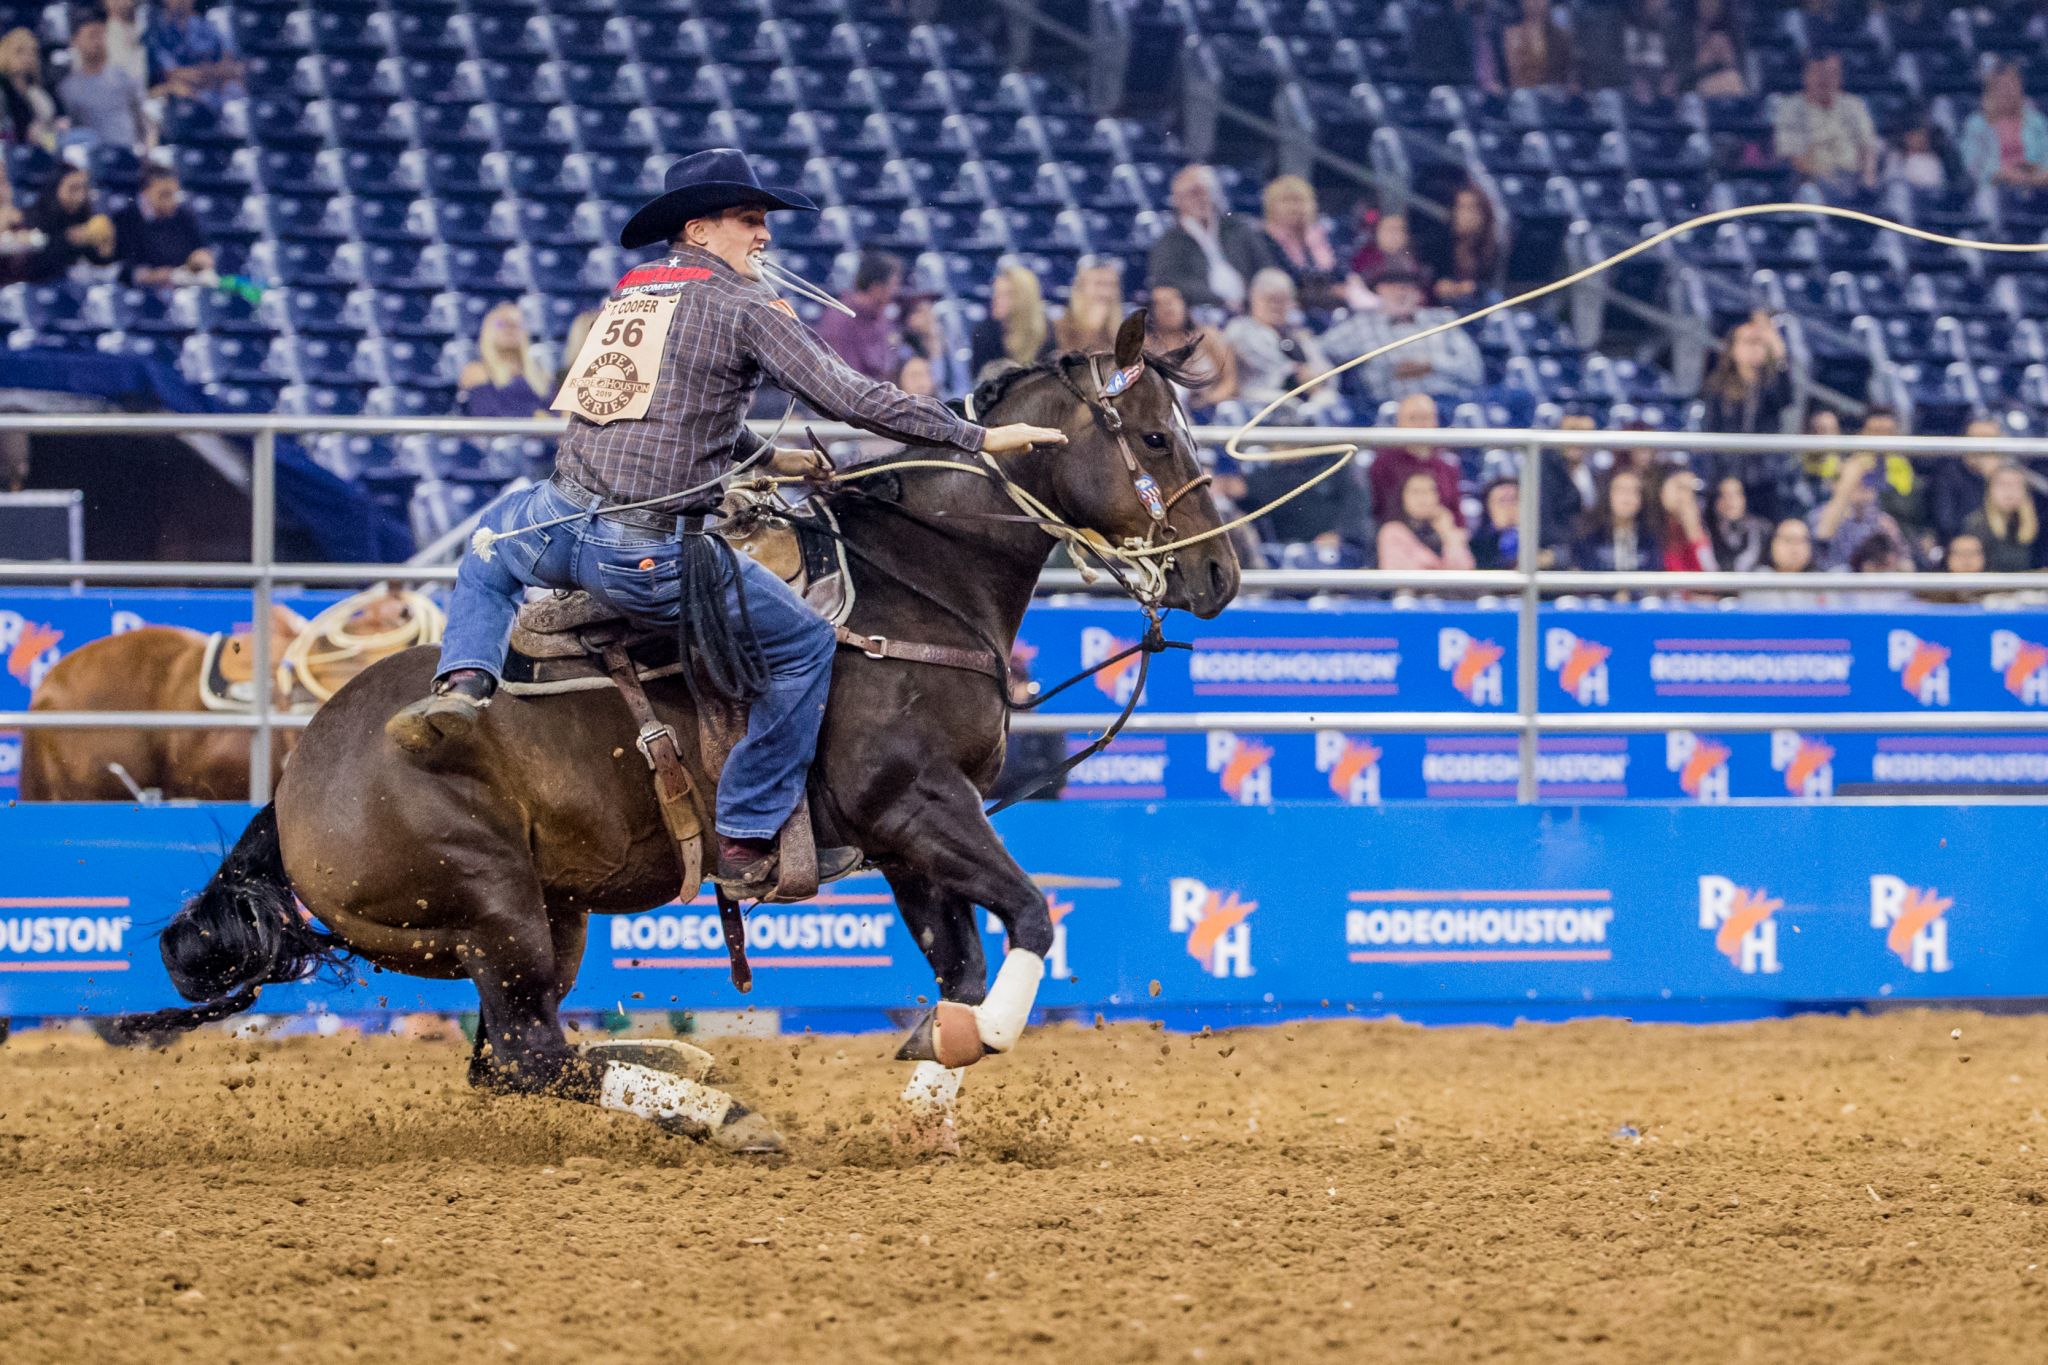 Rodeo 101 Here's your guide to understanding the events at RodeoHouston